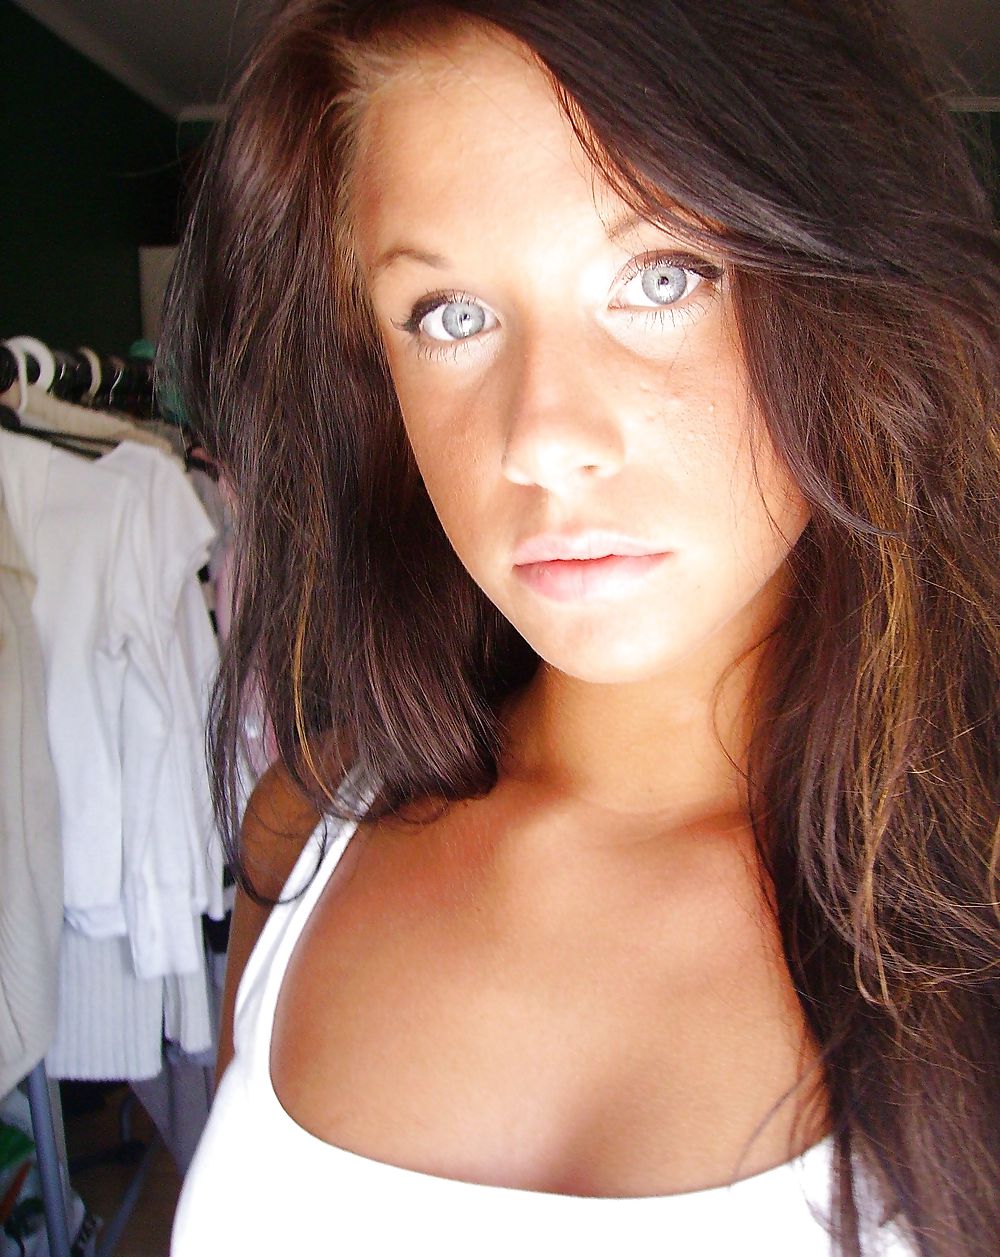 Another hot girl with blue eyes #21442536